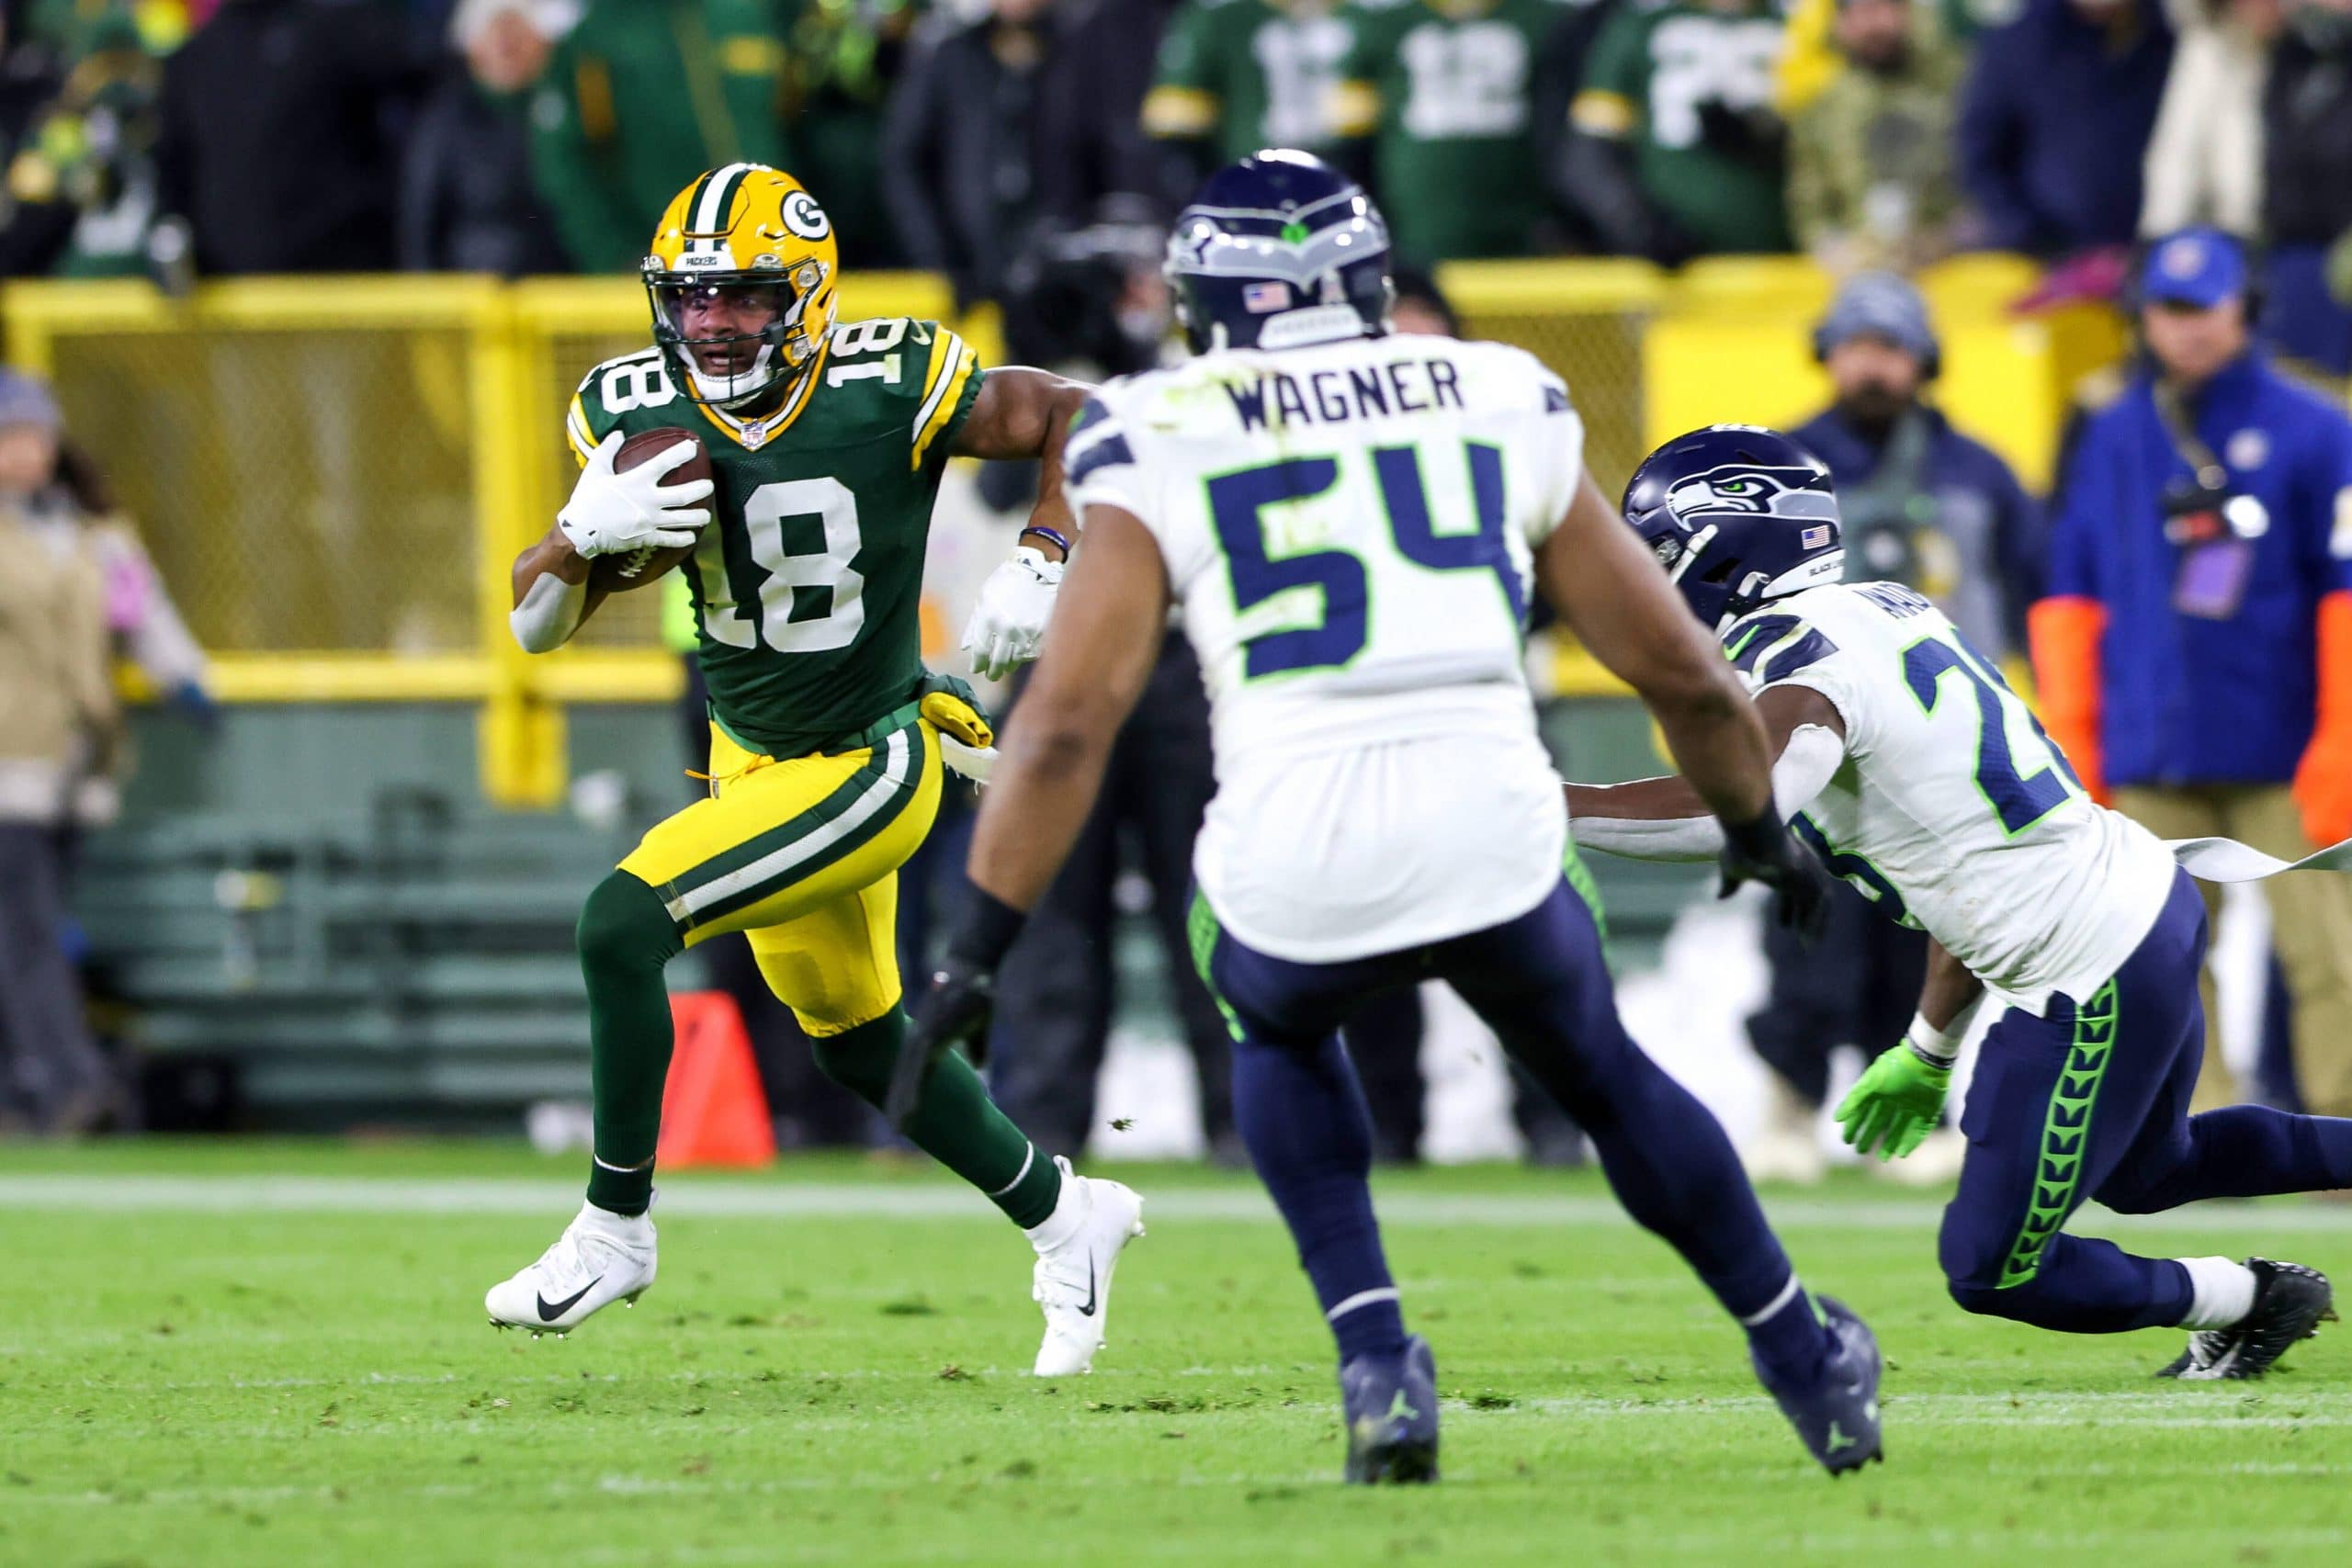 November 14, 2021: Green Bay Packers wide receiver Randall Cobb (18) runs after a catch during the NFL, American Footbal